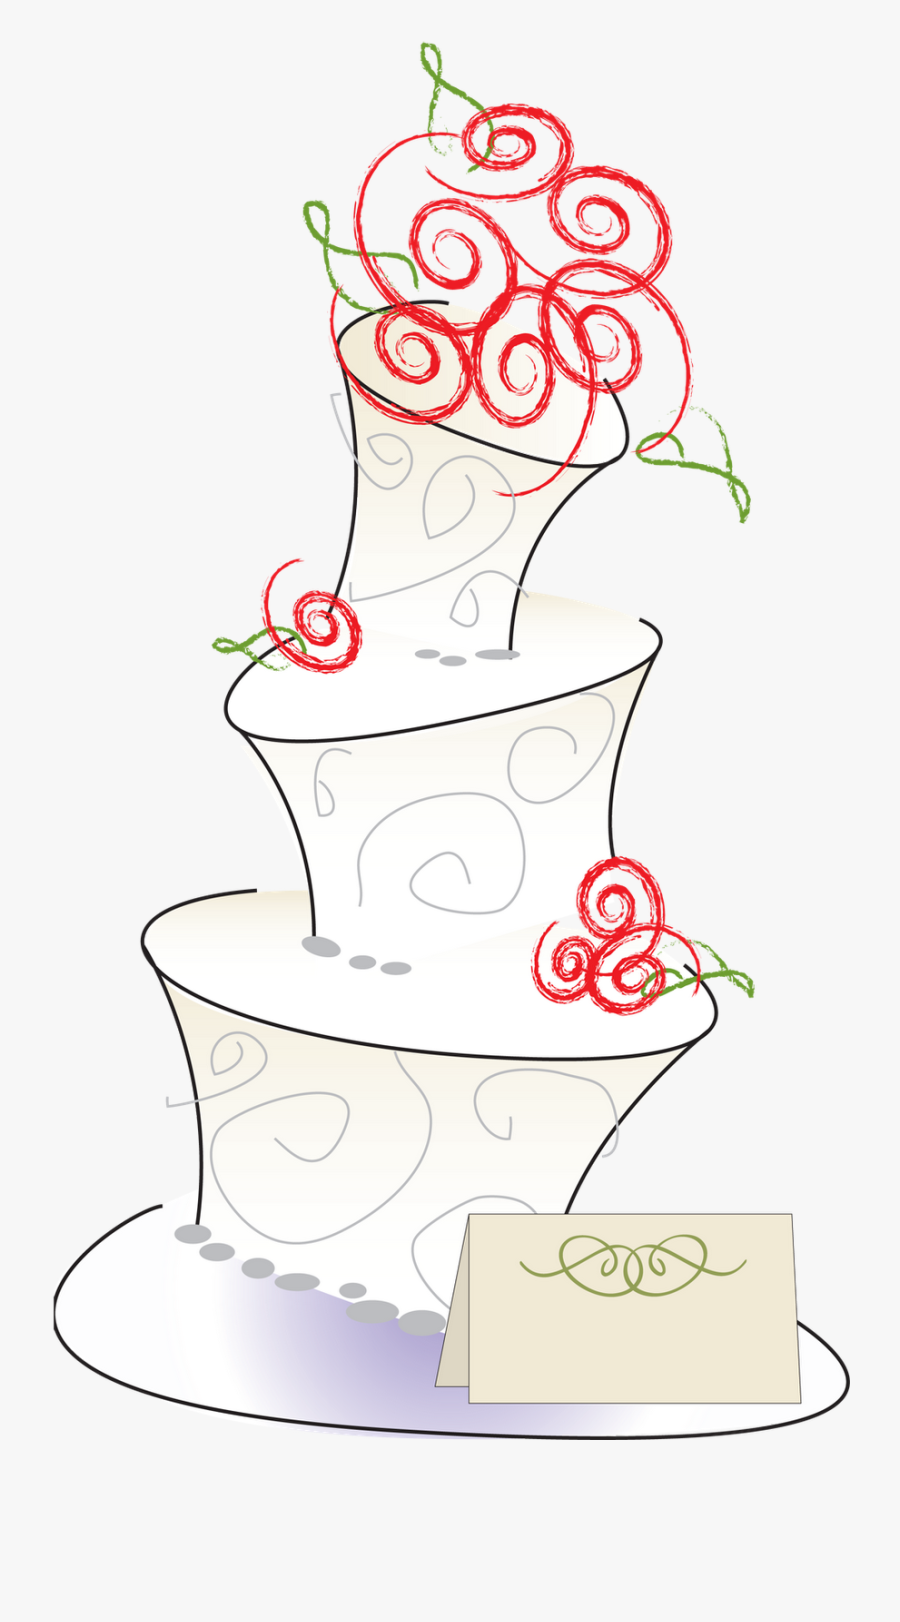 Whimsical Wedding Cake With Swirly Red Roses And A - Whimsical Wedding Cake Clipart, Transparent Clipart